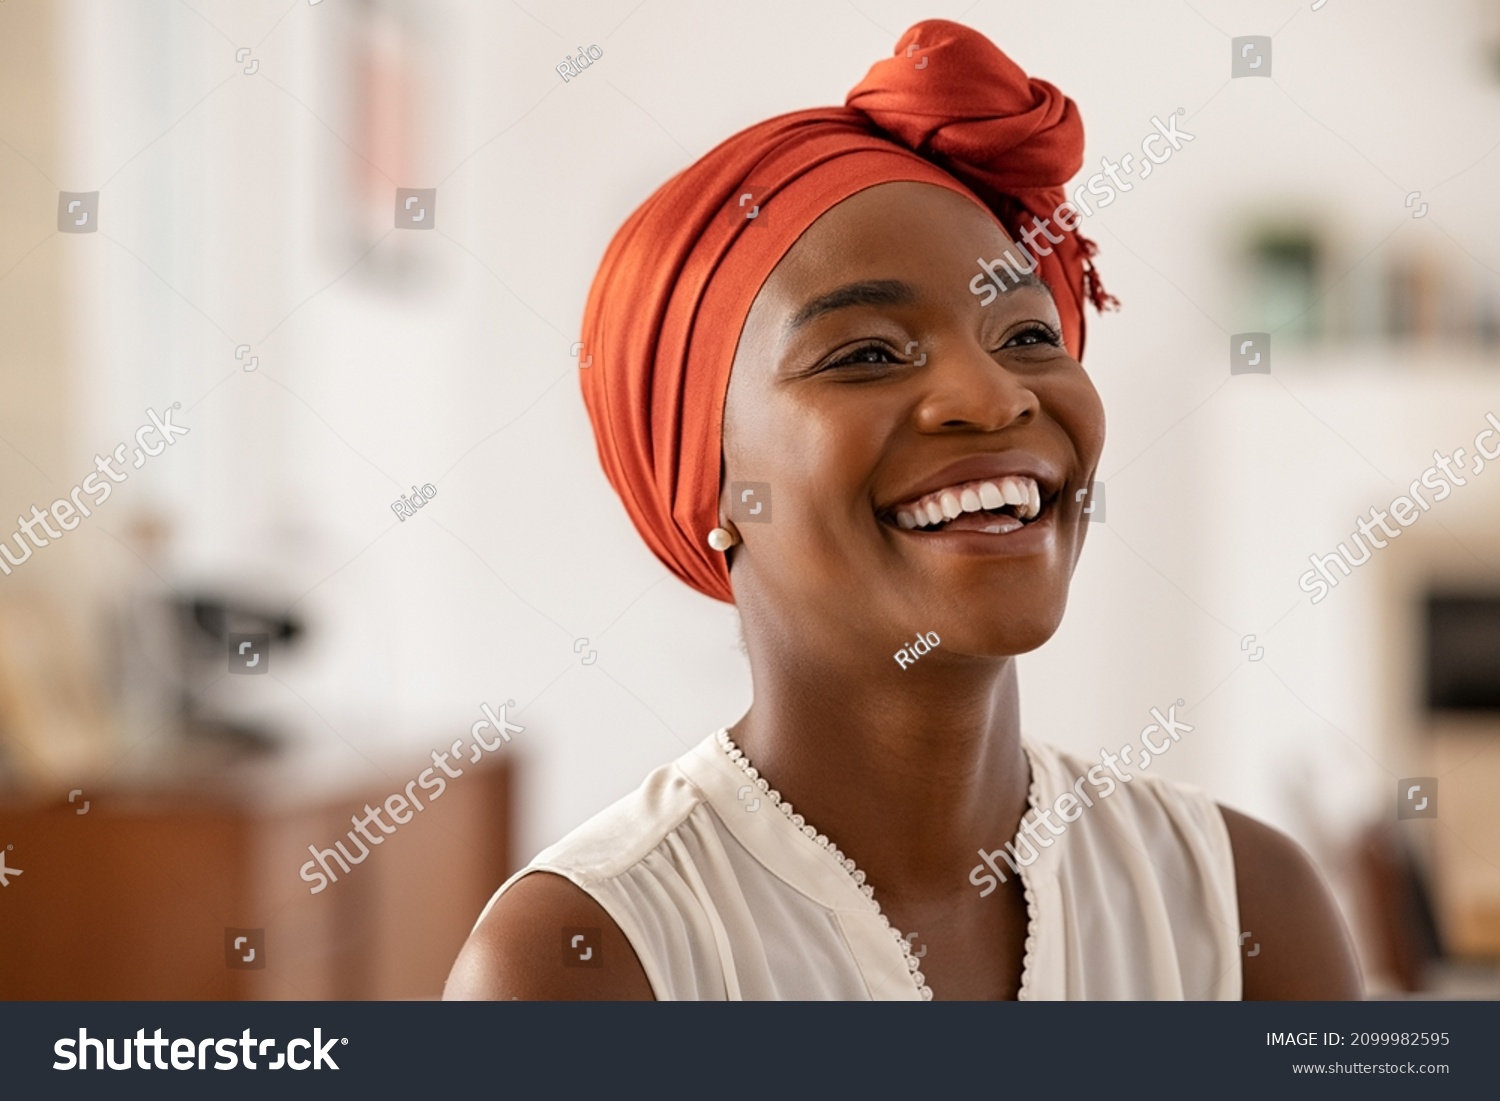 Smiling middle aged african american woman with orange headscarf. Beautiful black woman in casual clothing with traditional turban at home laughing. Portrait of mature carefree lady looking away. #2099982595